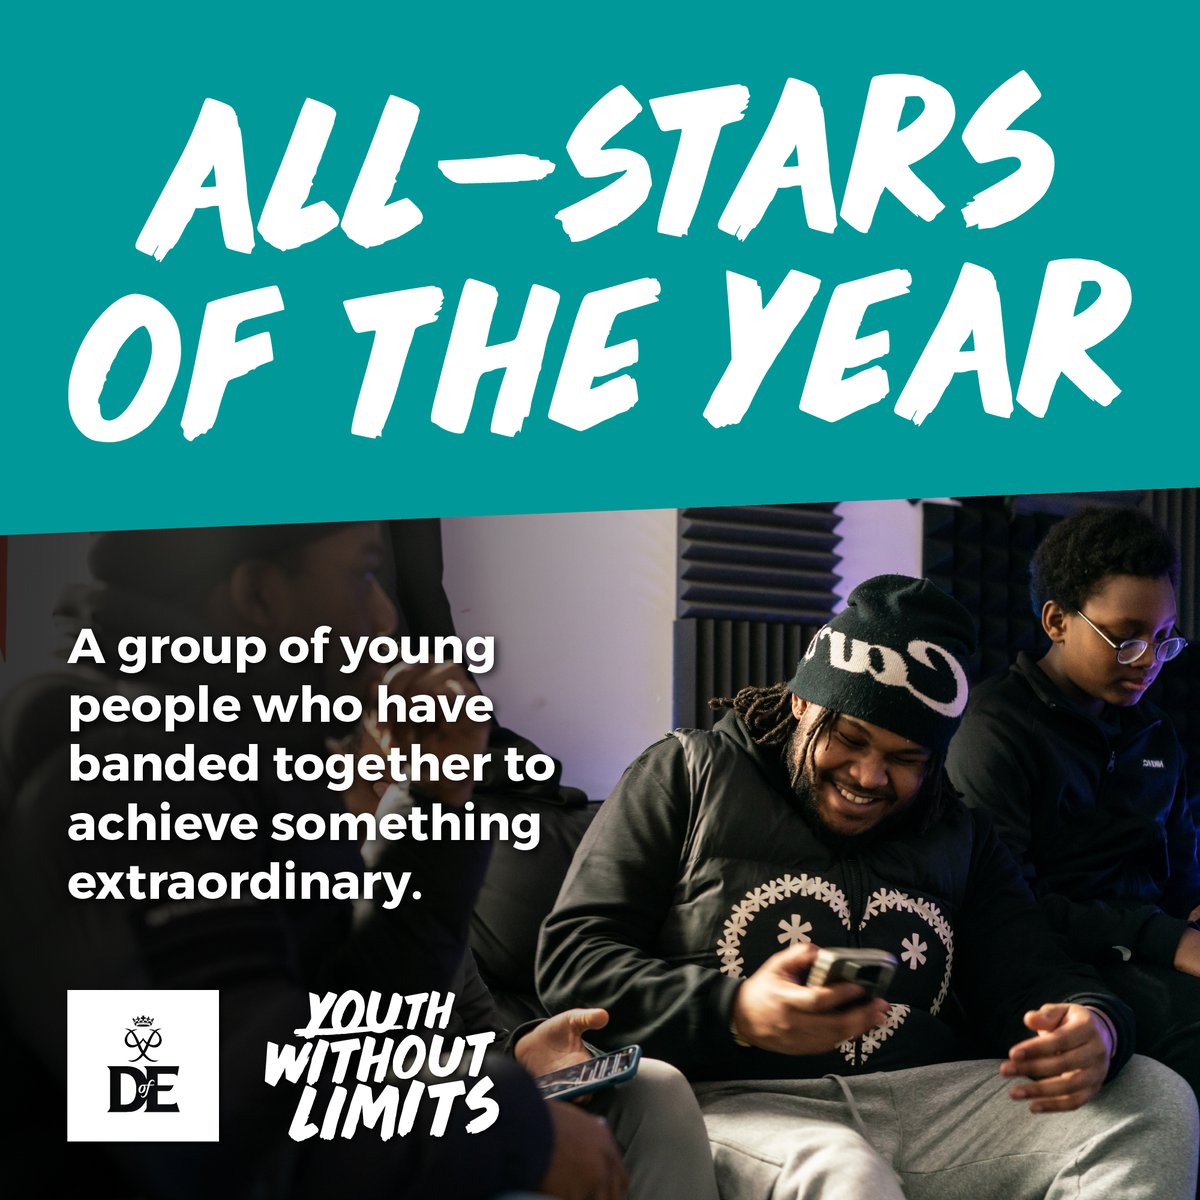 ✨Nominate an extraordinary team!✨ Do you know a group of young people who have banded together to achieve something brilliant? We want to hear about the power of a great team! 👉Nominate your All Stars of the Year today: bit.ly/46gMzCh